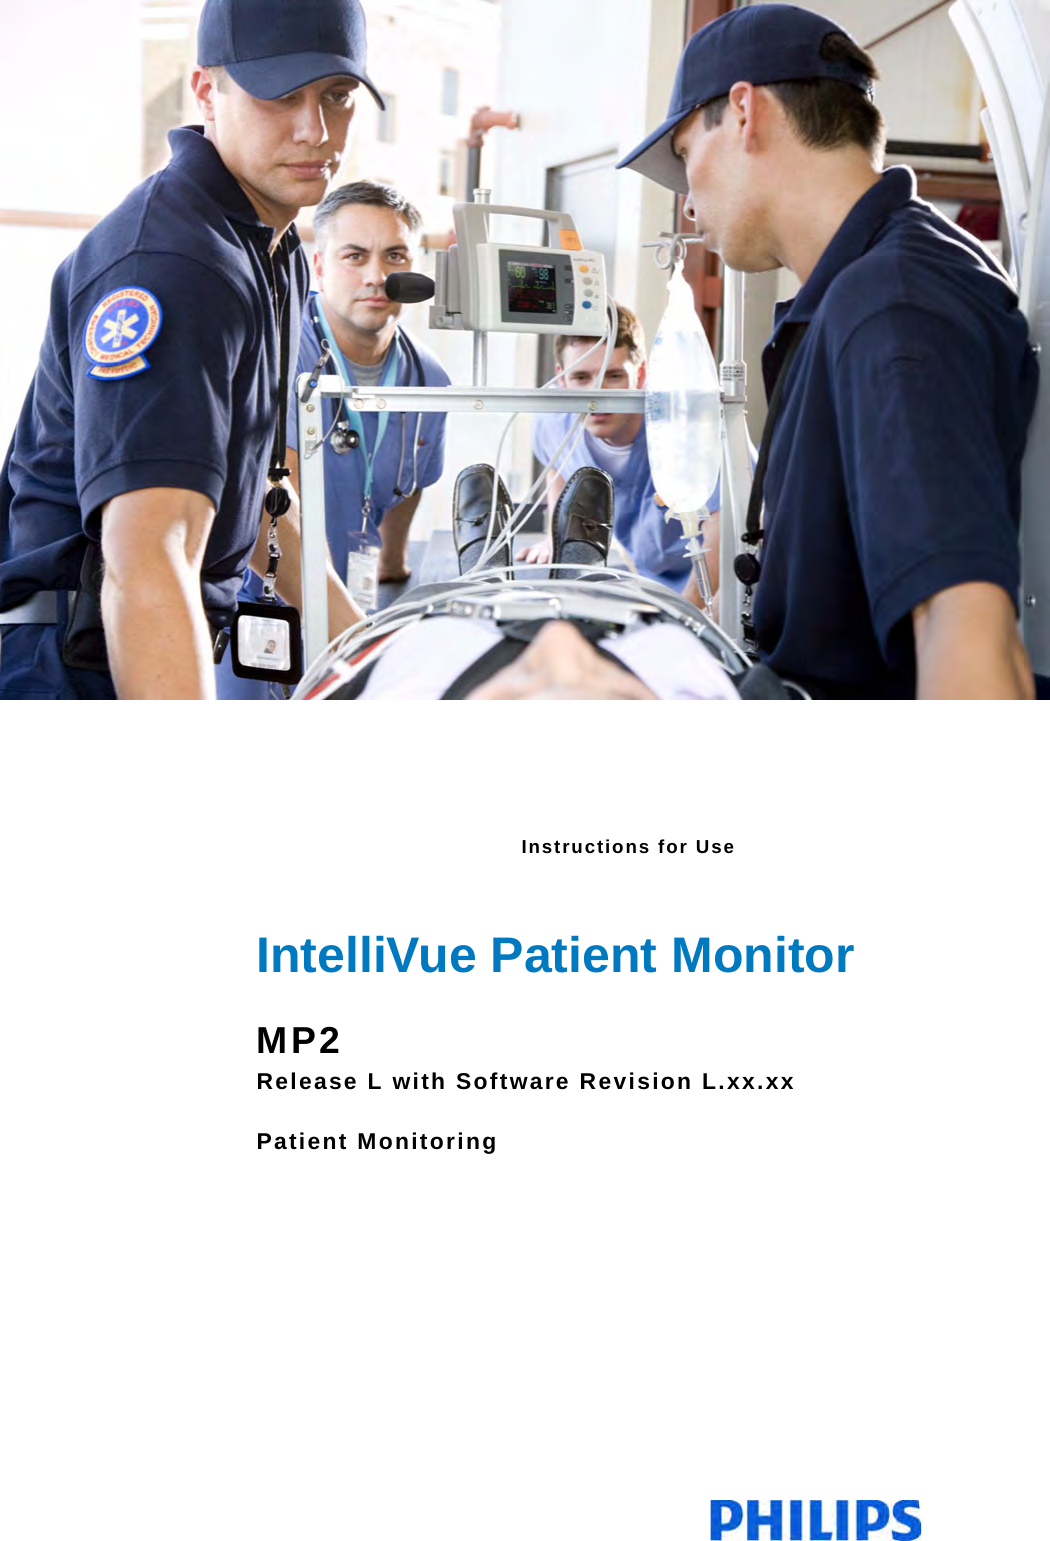 Instructions for Use IntelliVue Patient MonitorMP2Release L with Software Revision L.xx.xxPatient Monitoring